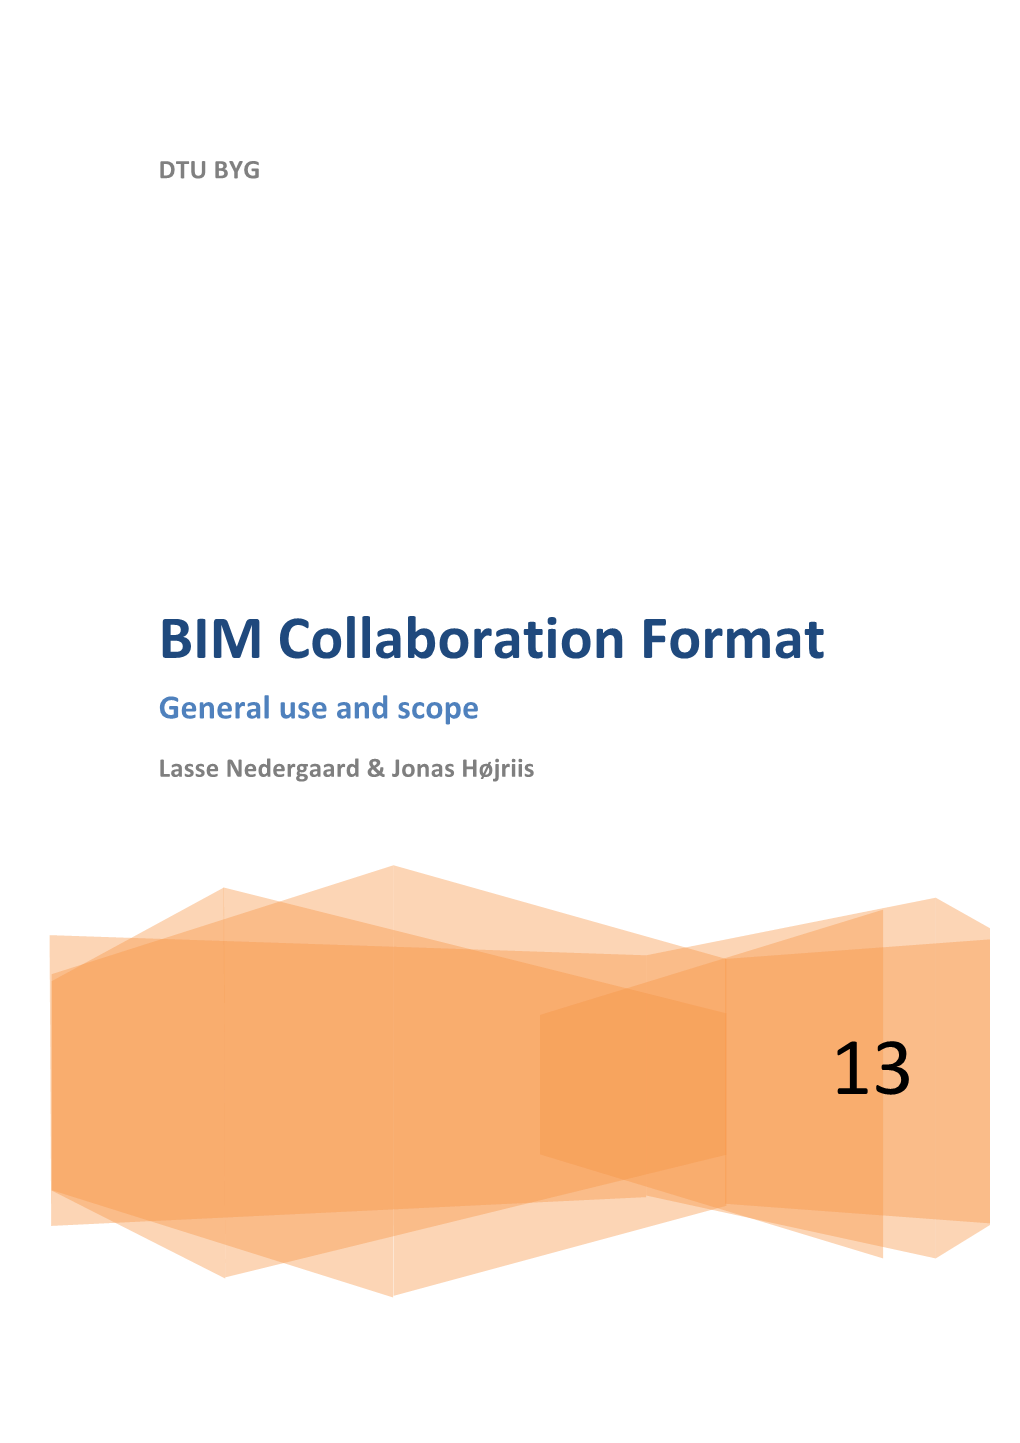 BIM Collaboration Format General Use and Scope